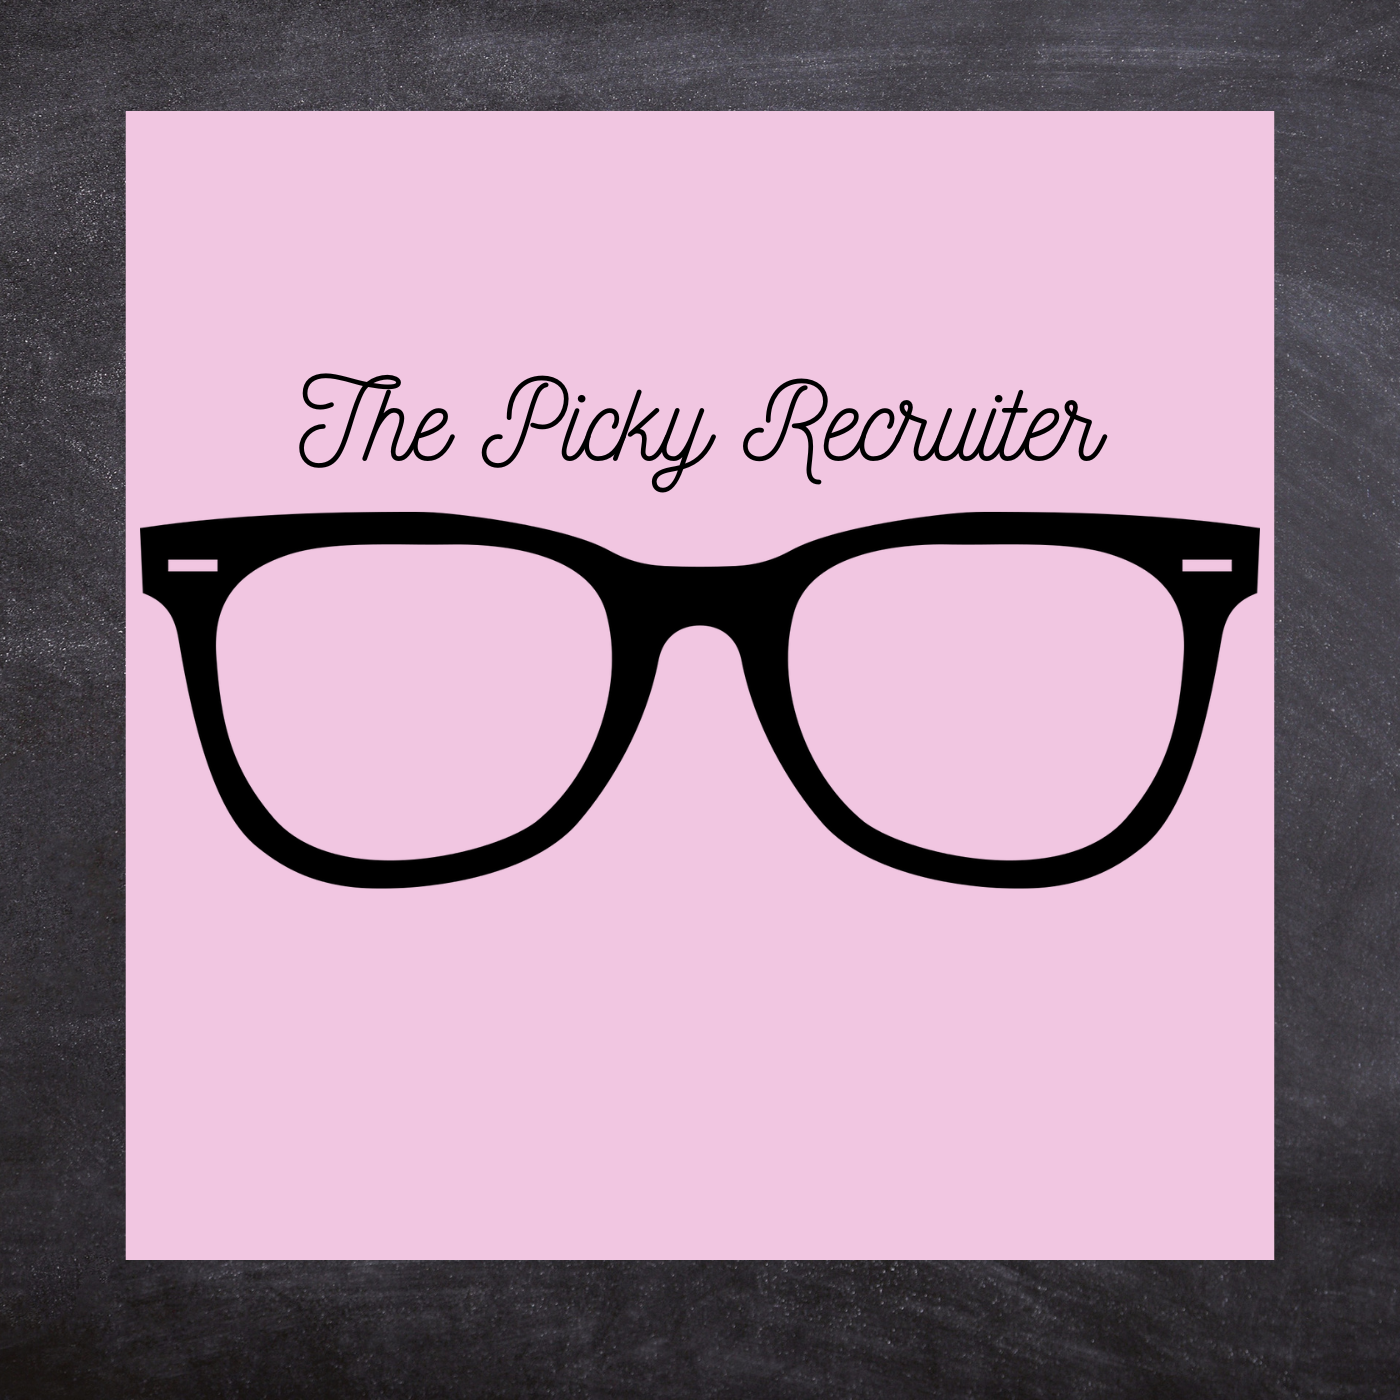 The Picky Recruiter